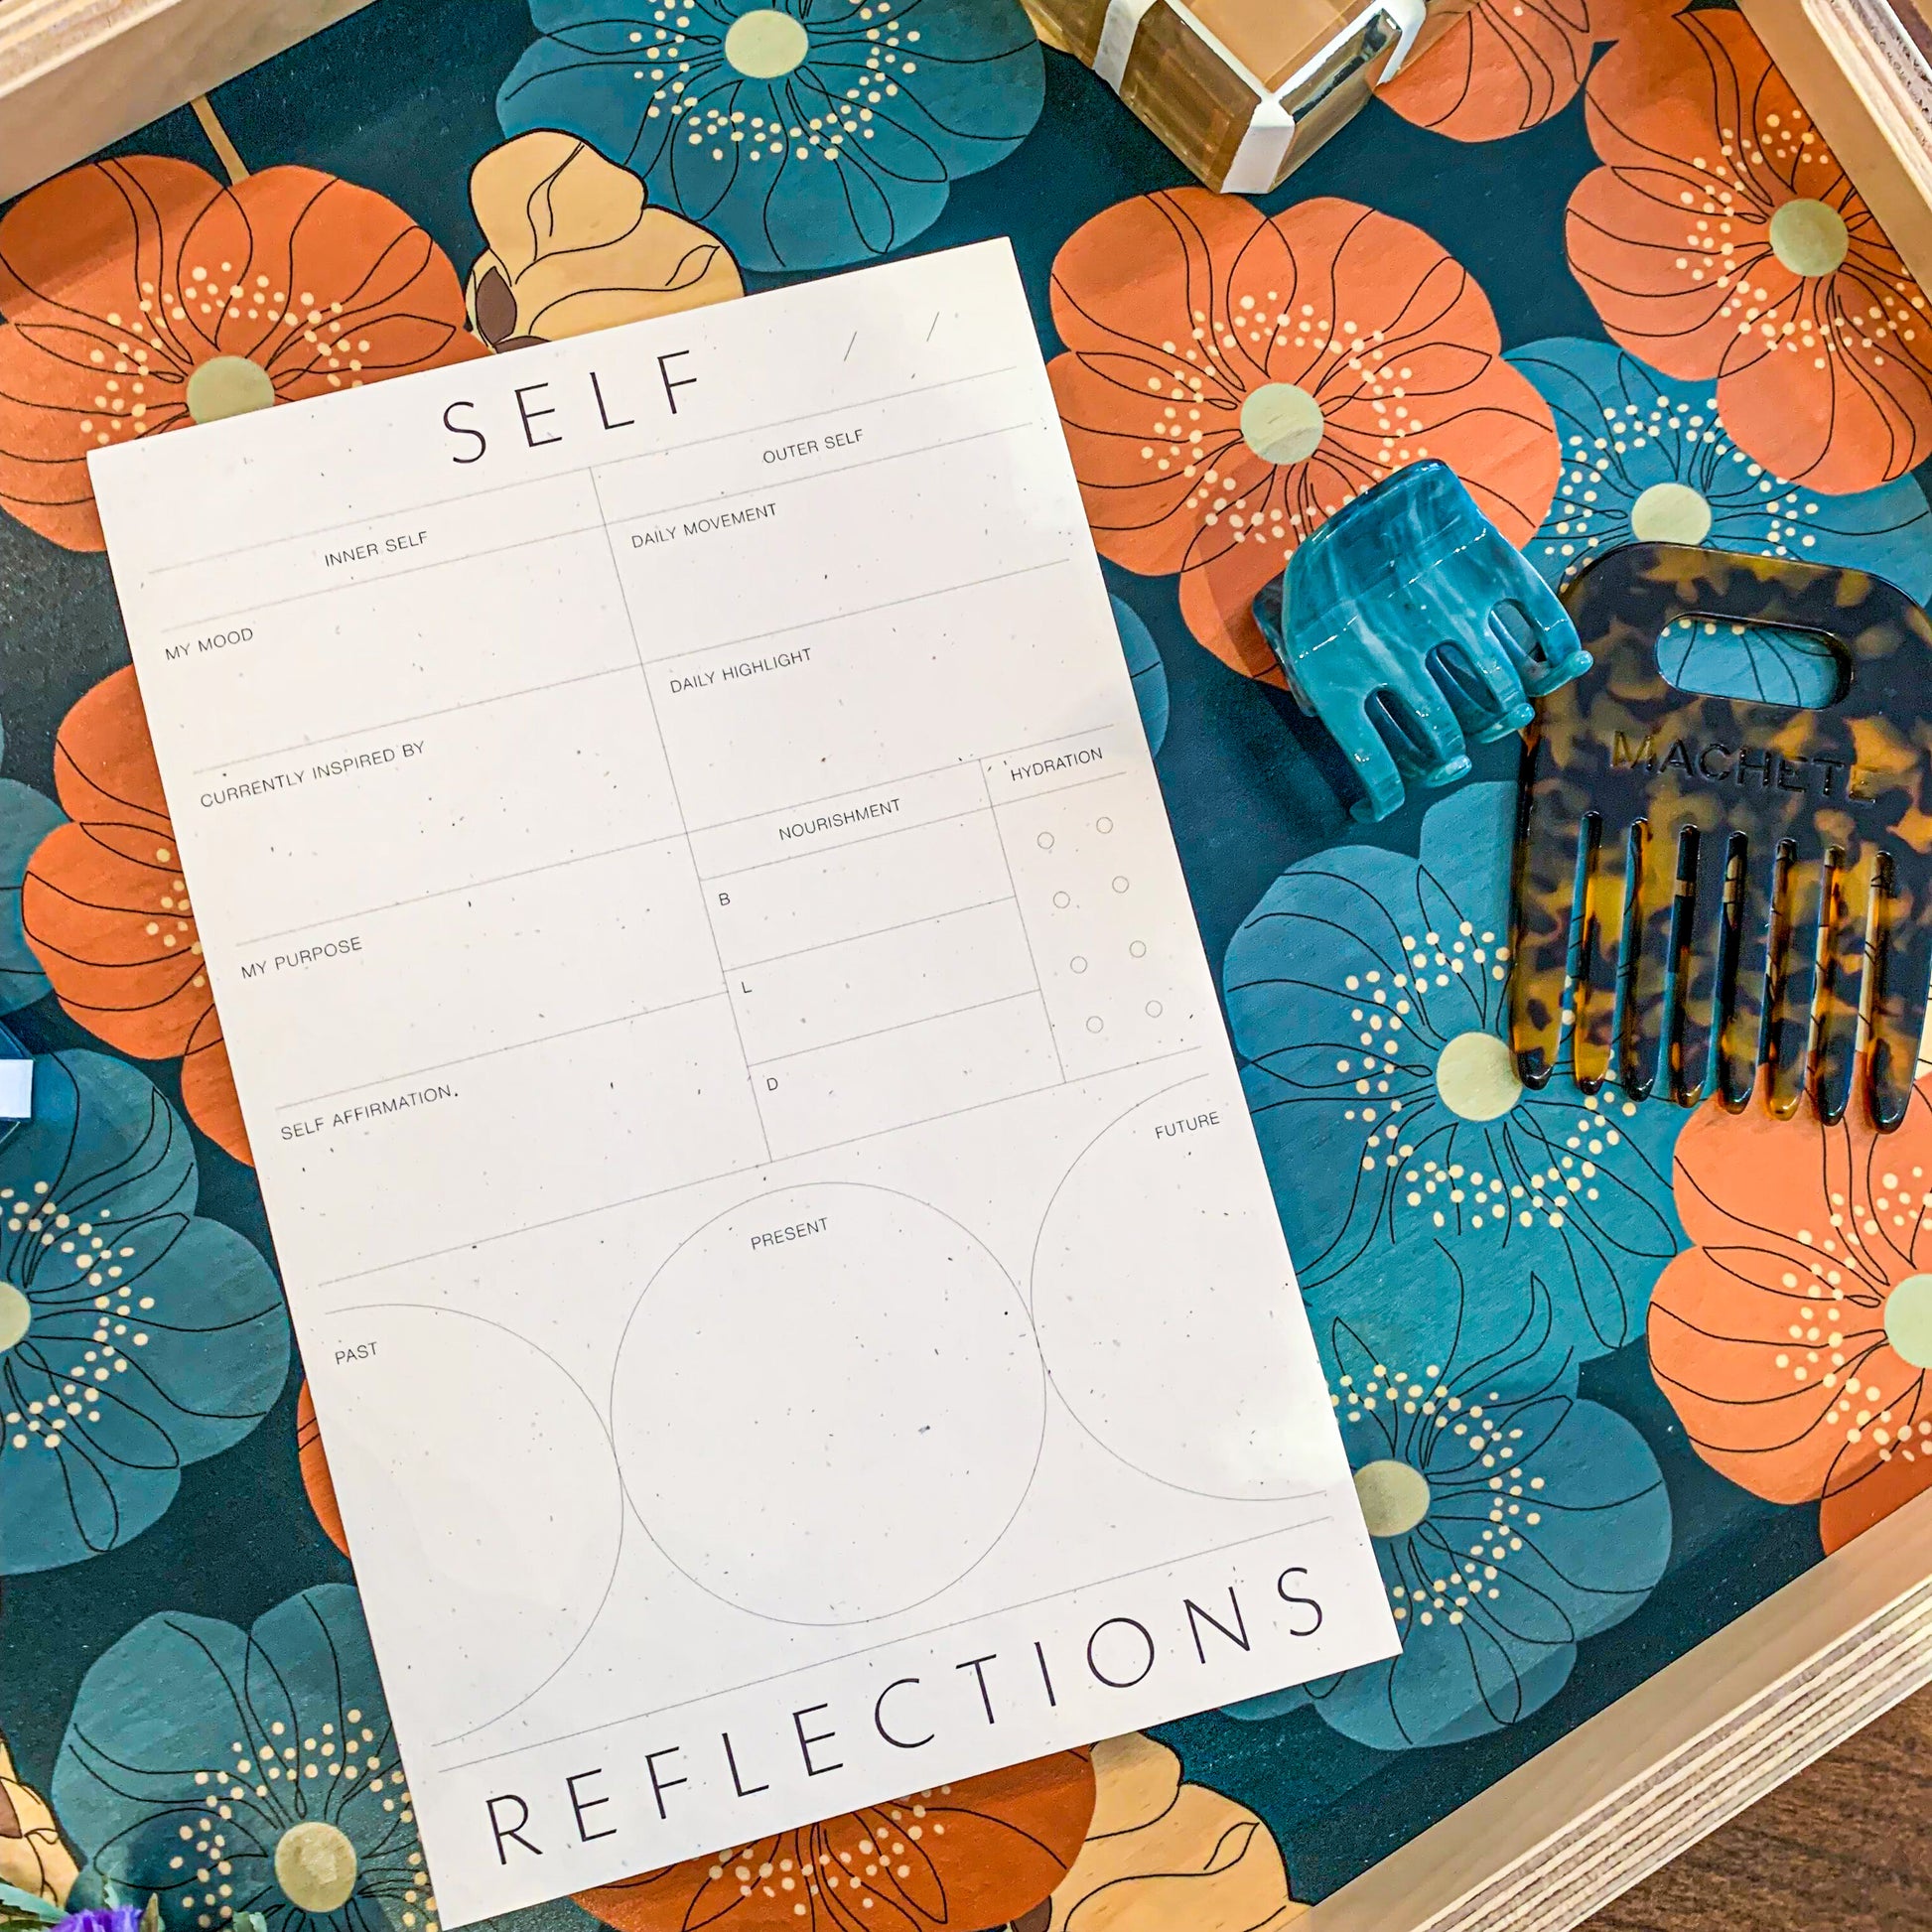 Wilde house paper “self reflections pad” on a blue and orange poppy decorative tray. There is also a Machete comb no 4 in classic tortoise on the right on the reflections pad.